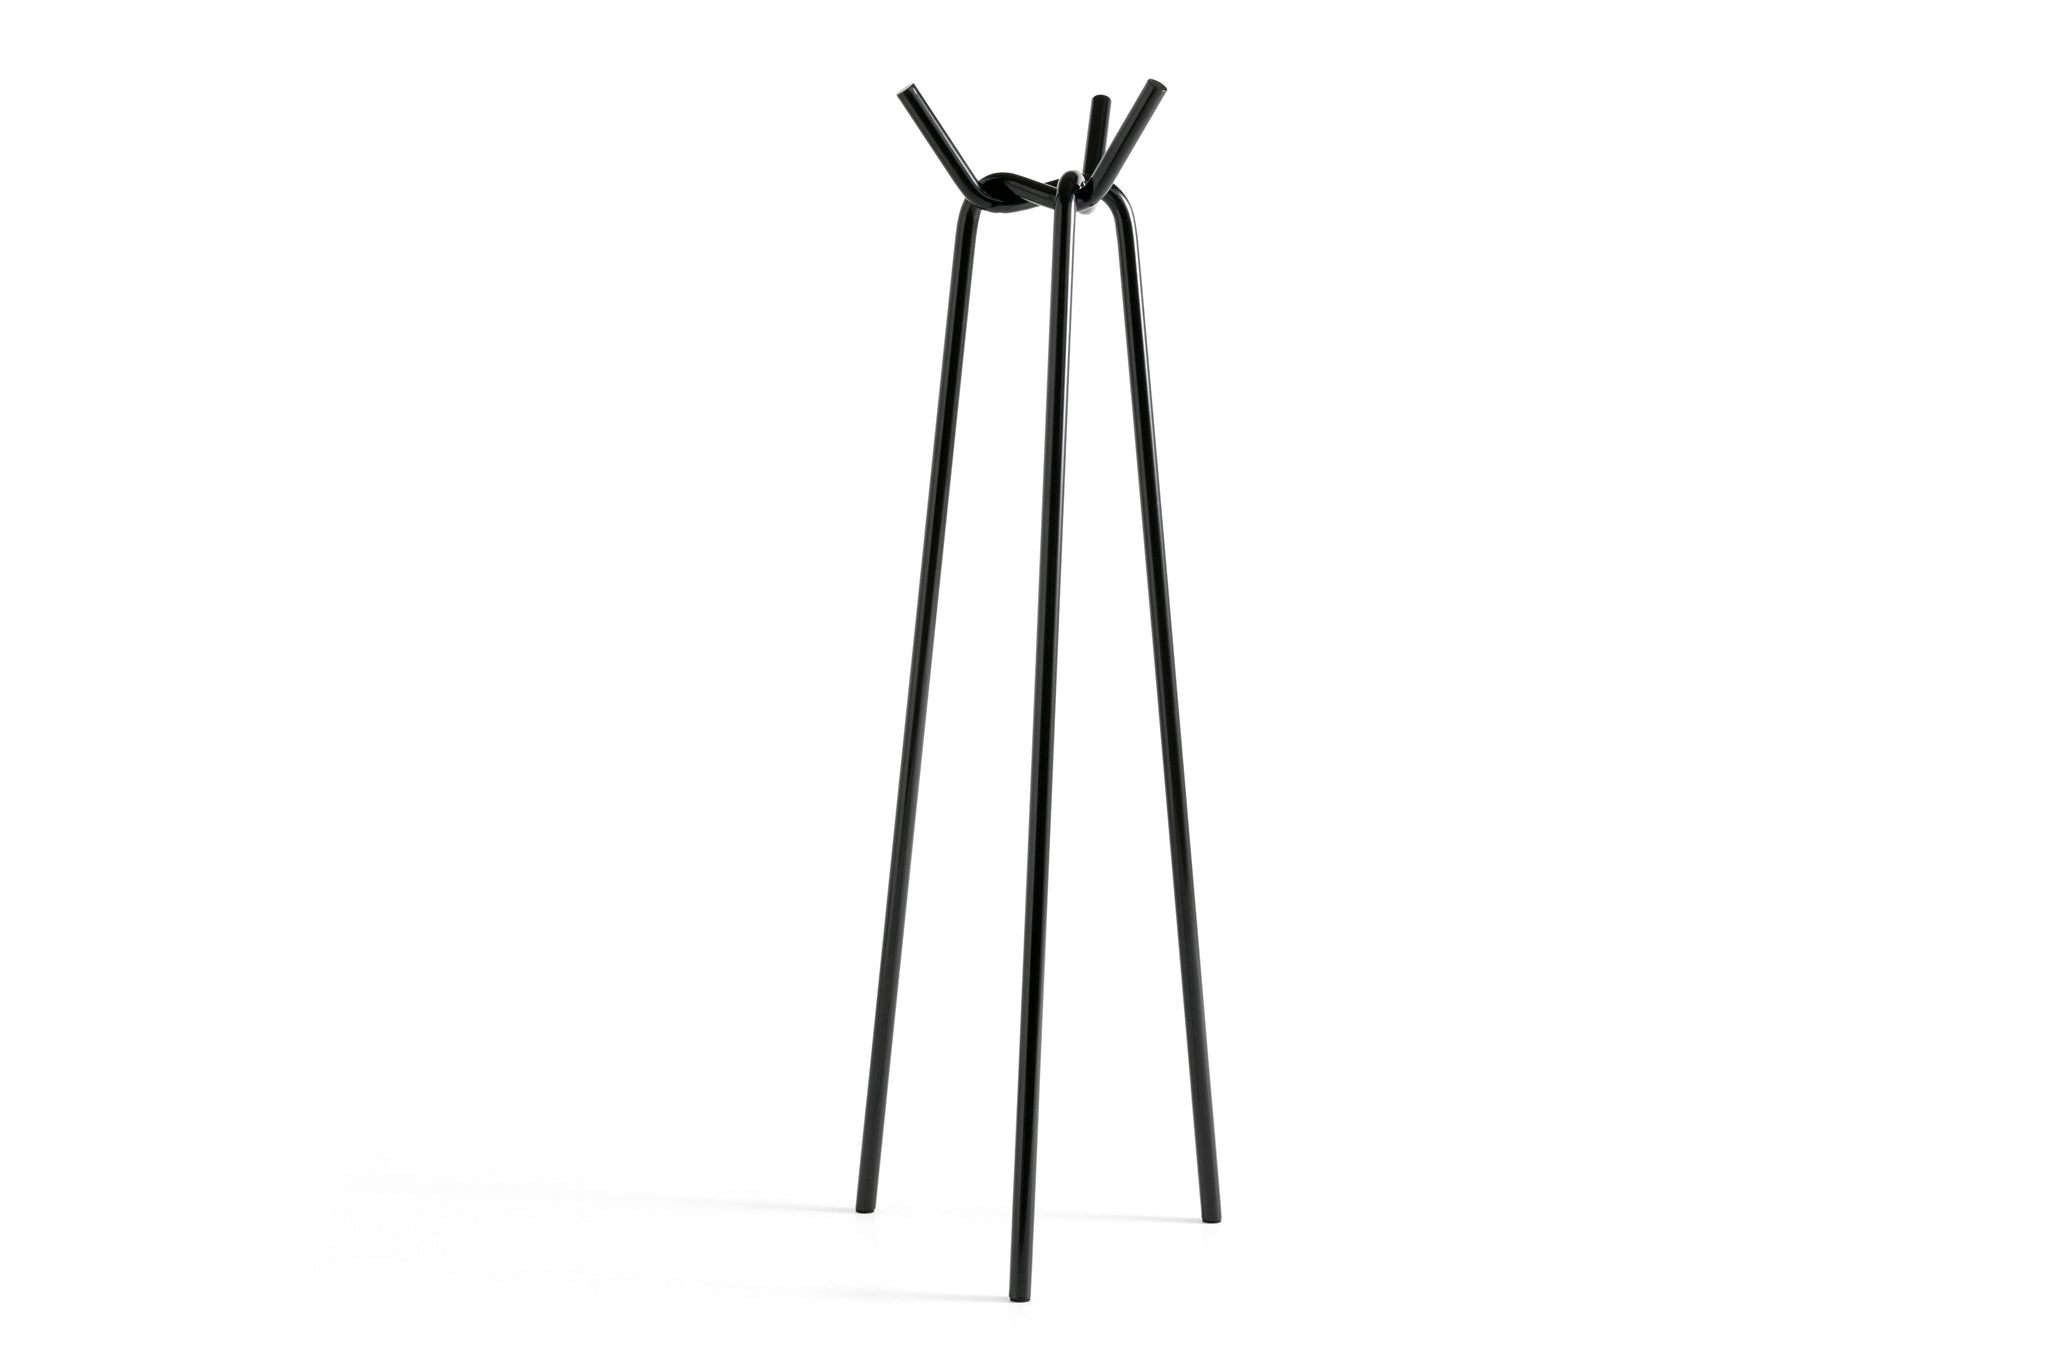 Buy the HAY Knit Coat Stand at kin. in Birmingham | Furniture & Design ...